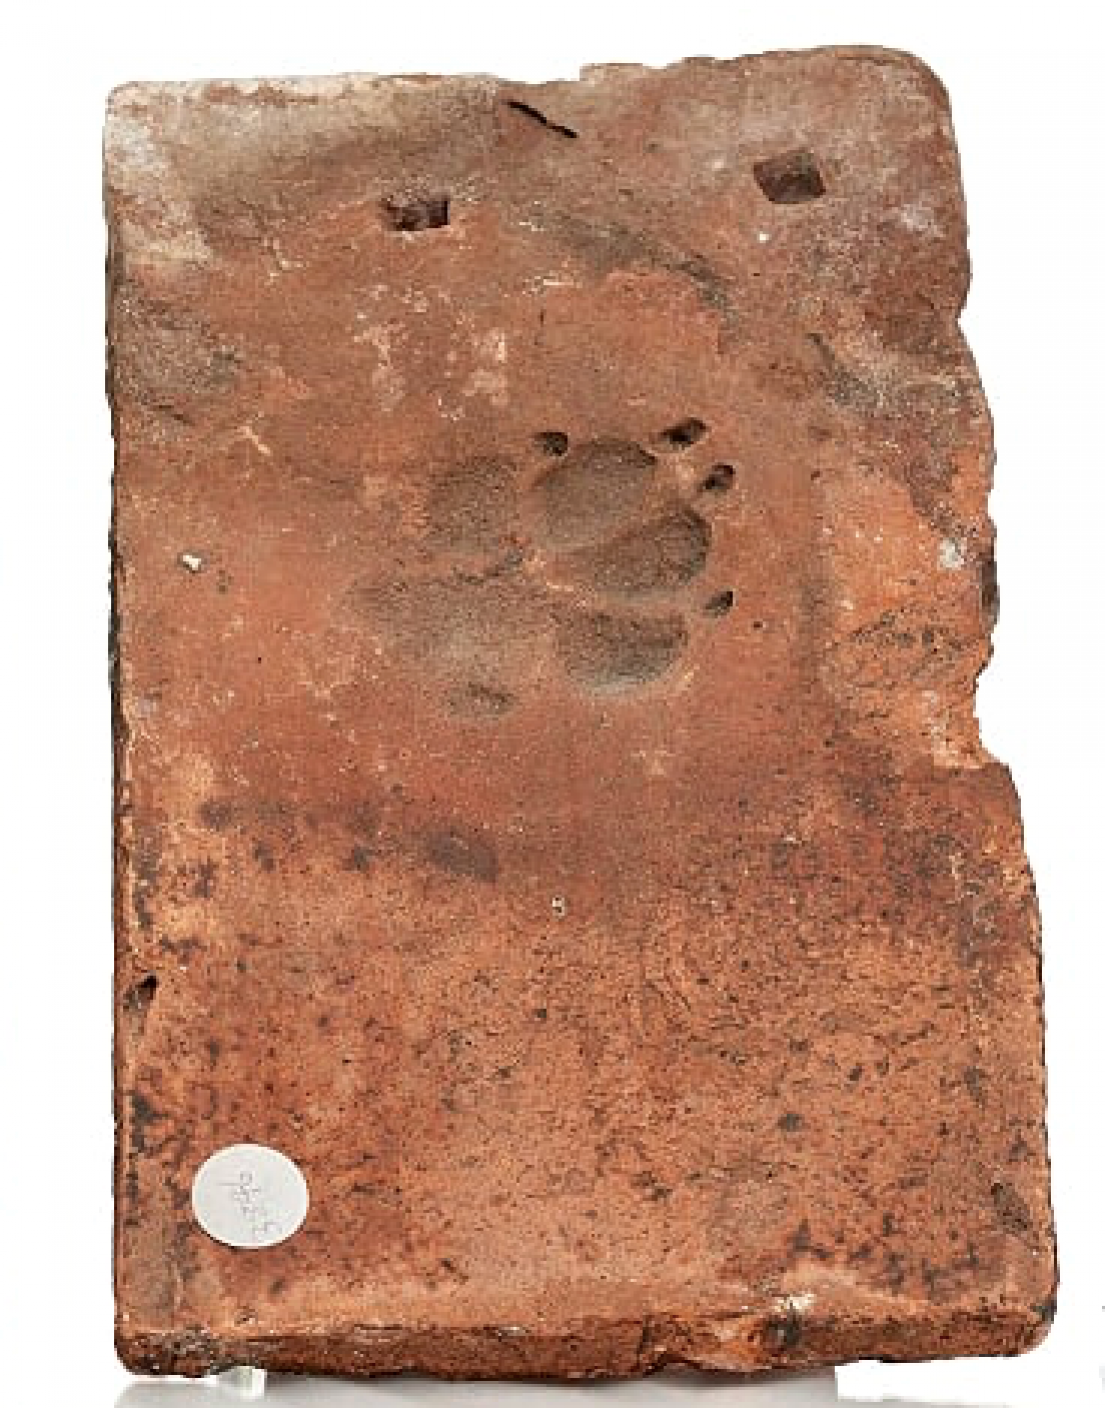 A clay tile with a dog paw print pressed into it.